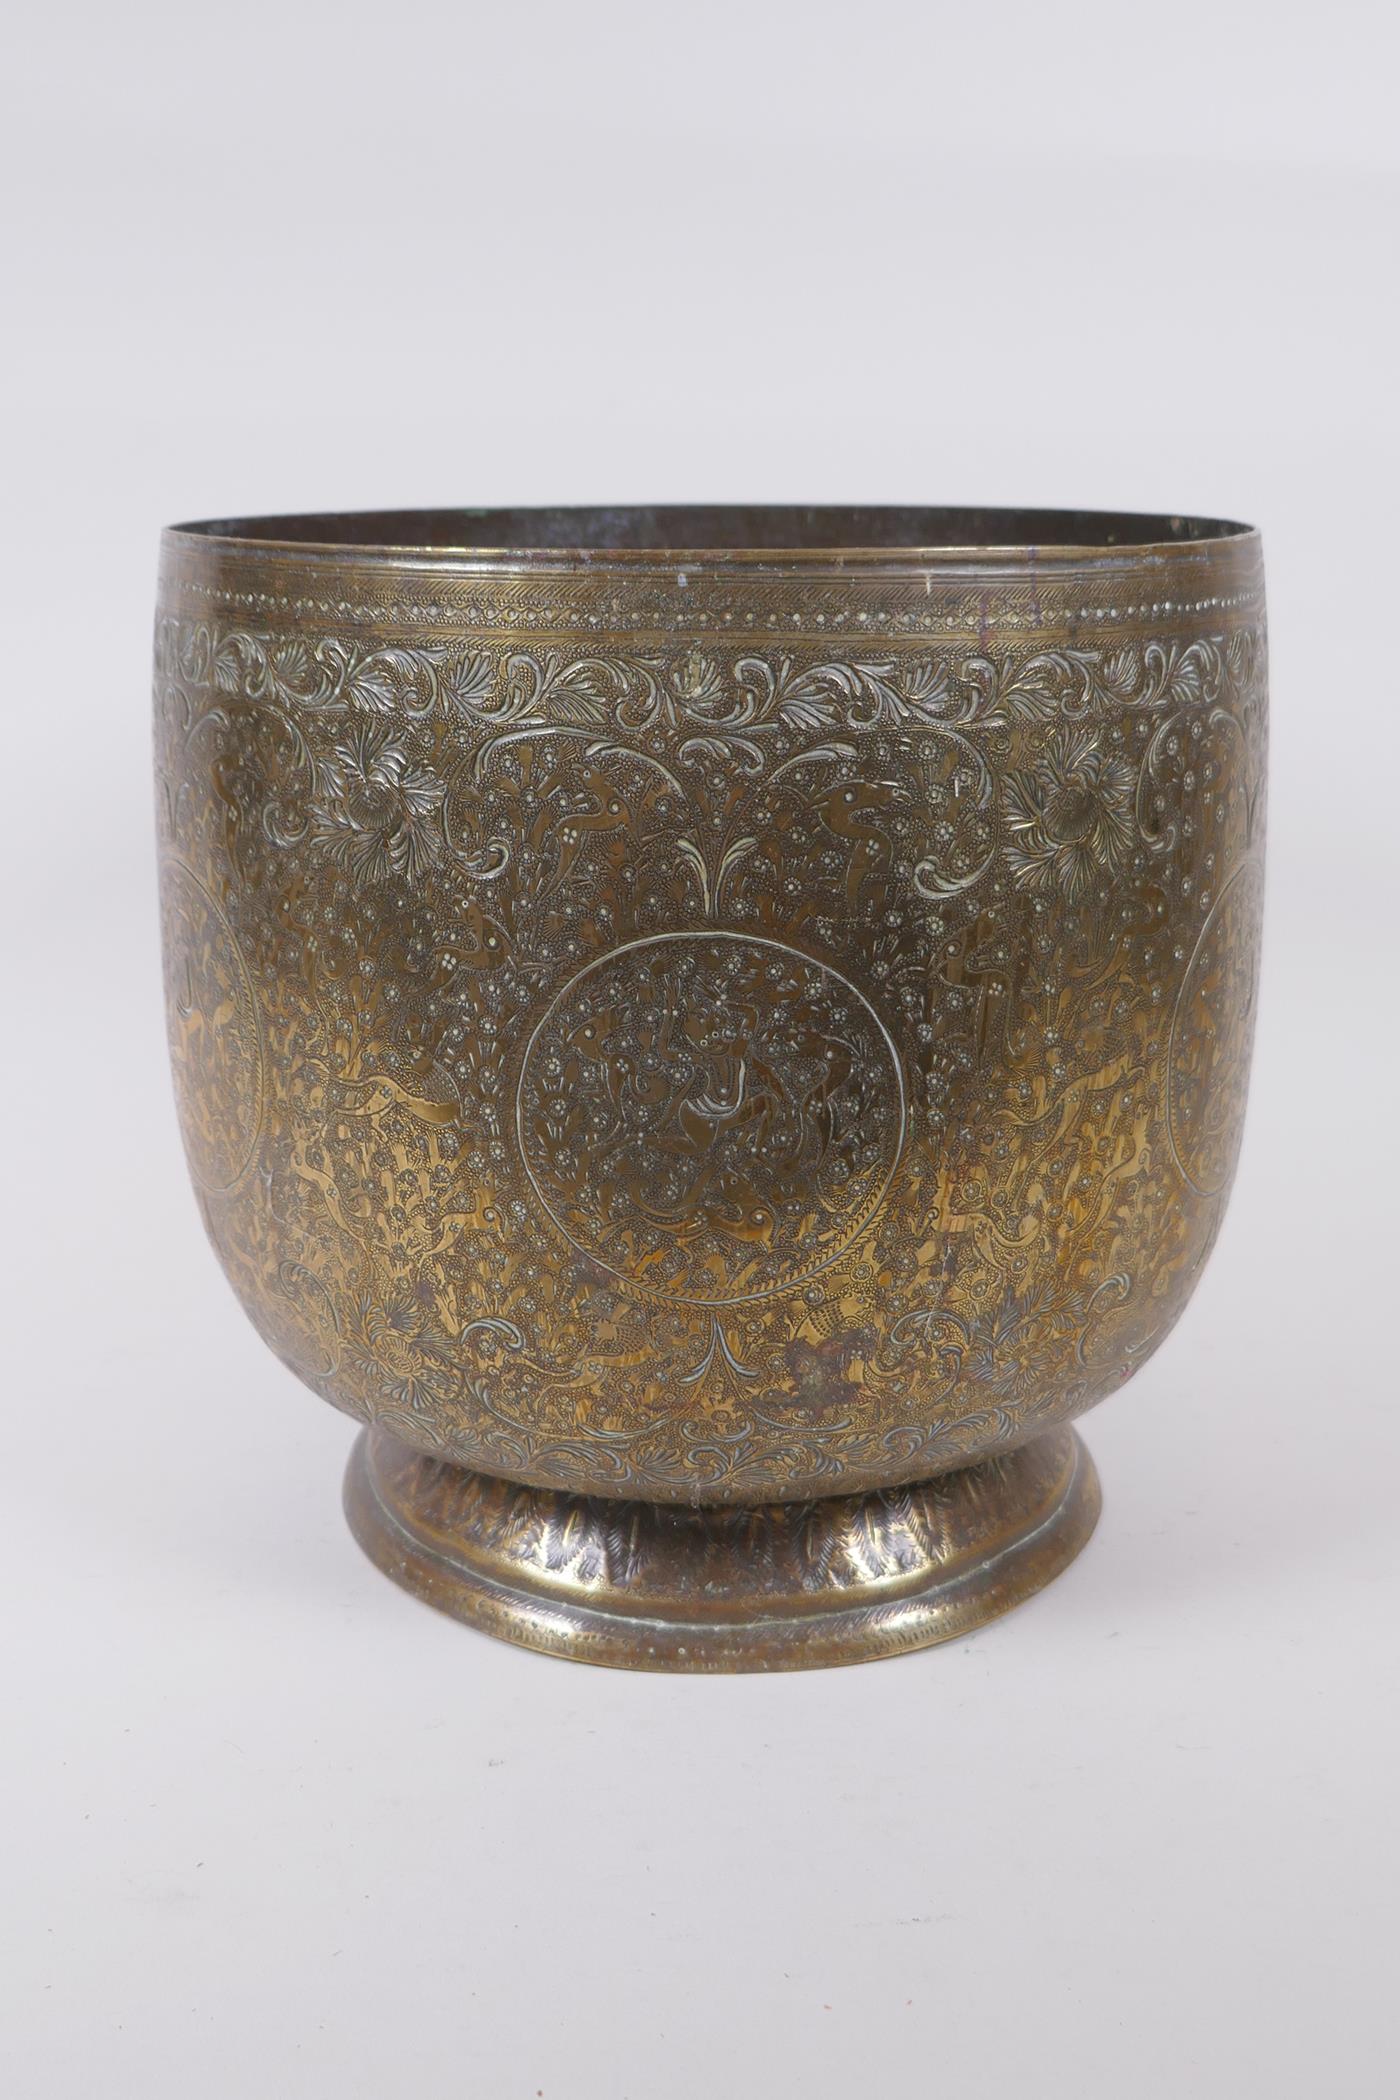 An antique Indo Persian brass planter with chased and hammered decoration of dancing figures and